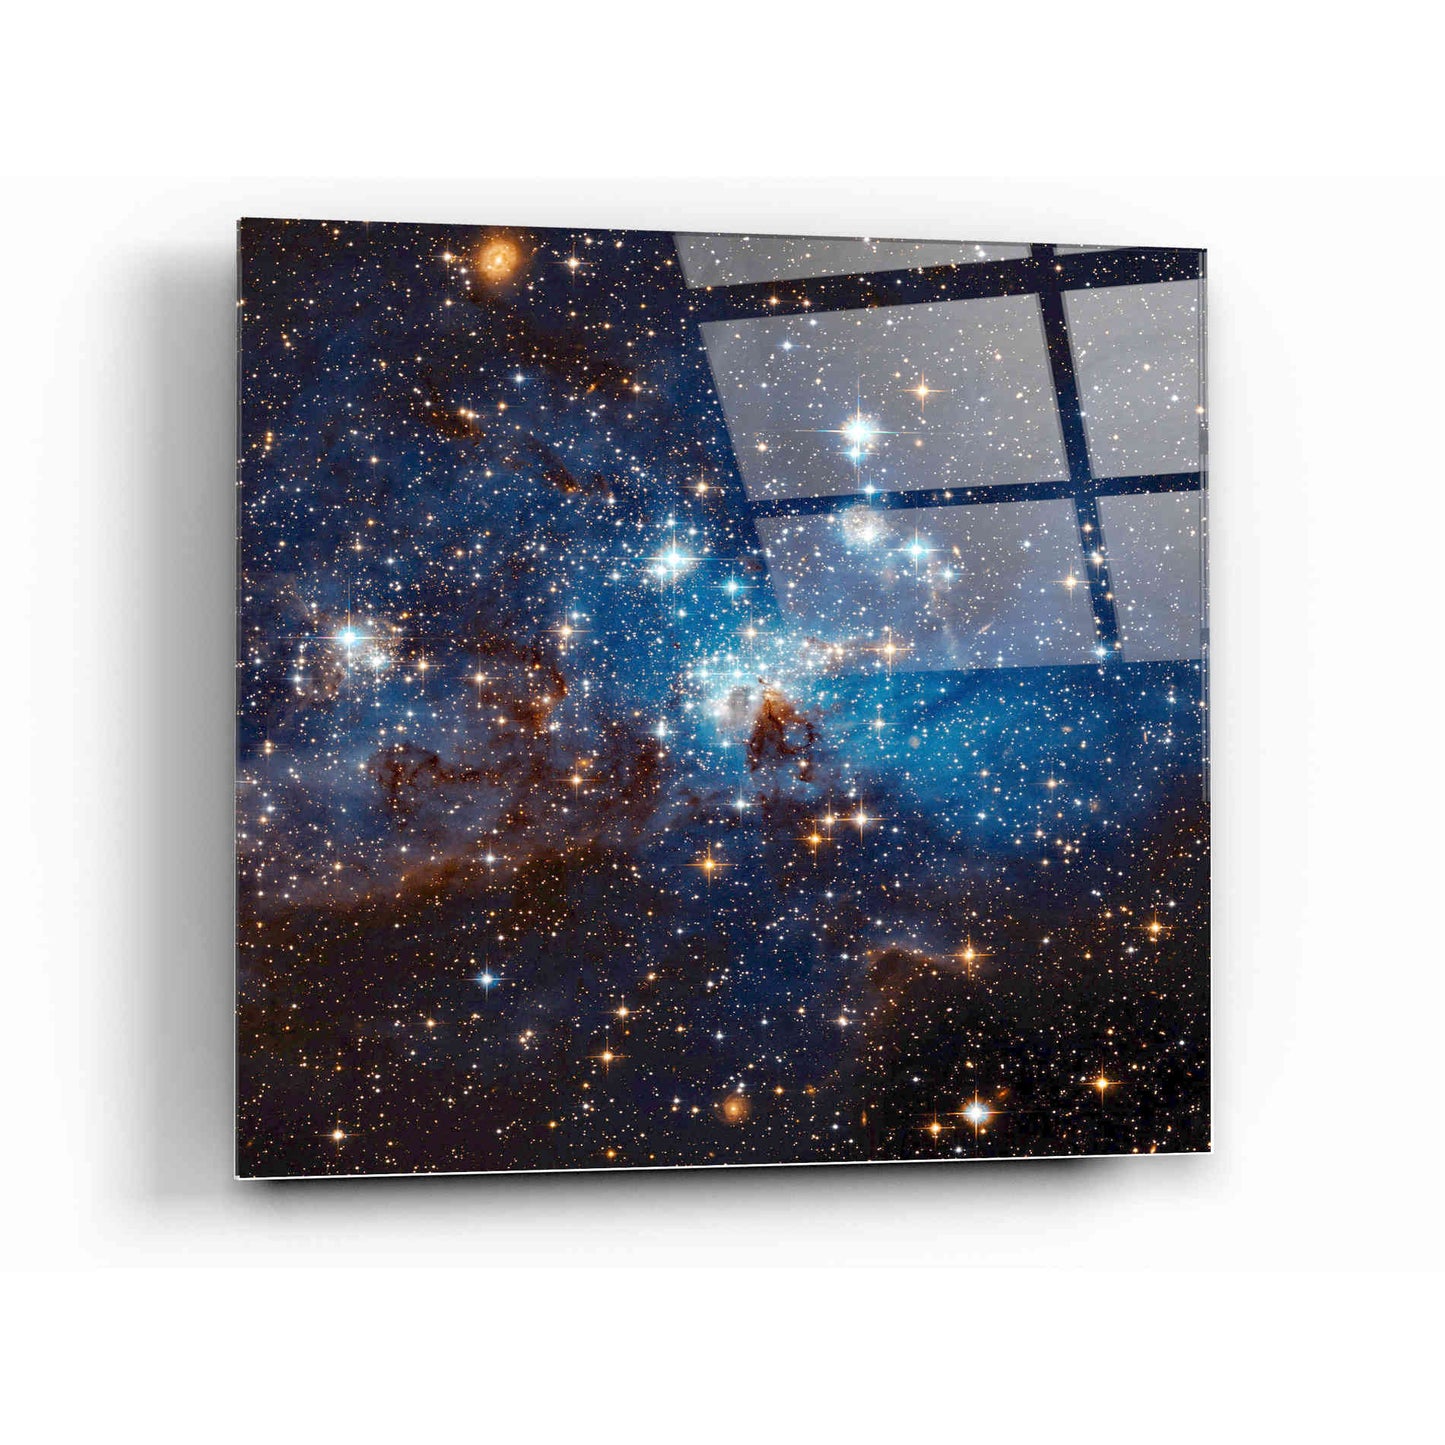 Epic Art "LH 95 Star Cluster" Hubble Space Telescope Acrylic Glass Wall Art,12x12